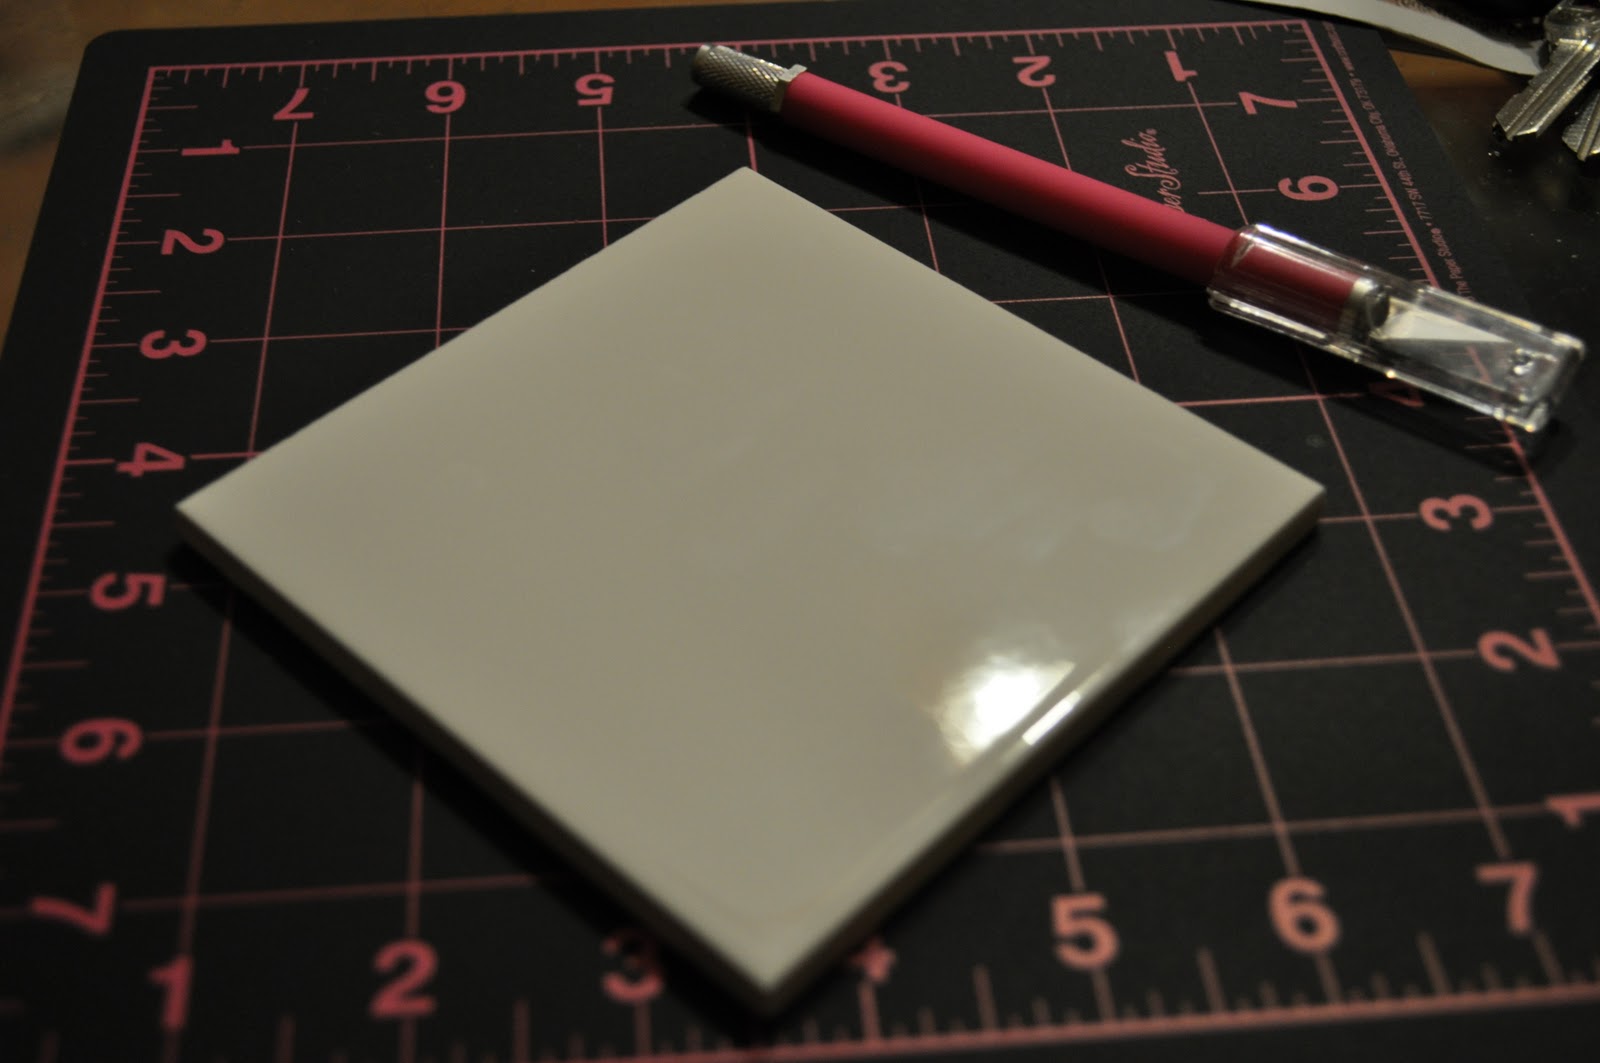 The Crafty Crystal: 12 Days of Christmas Crafts #9: Tile Coasters